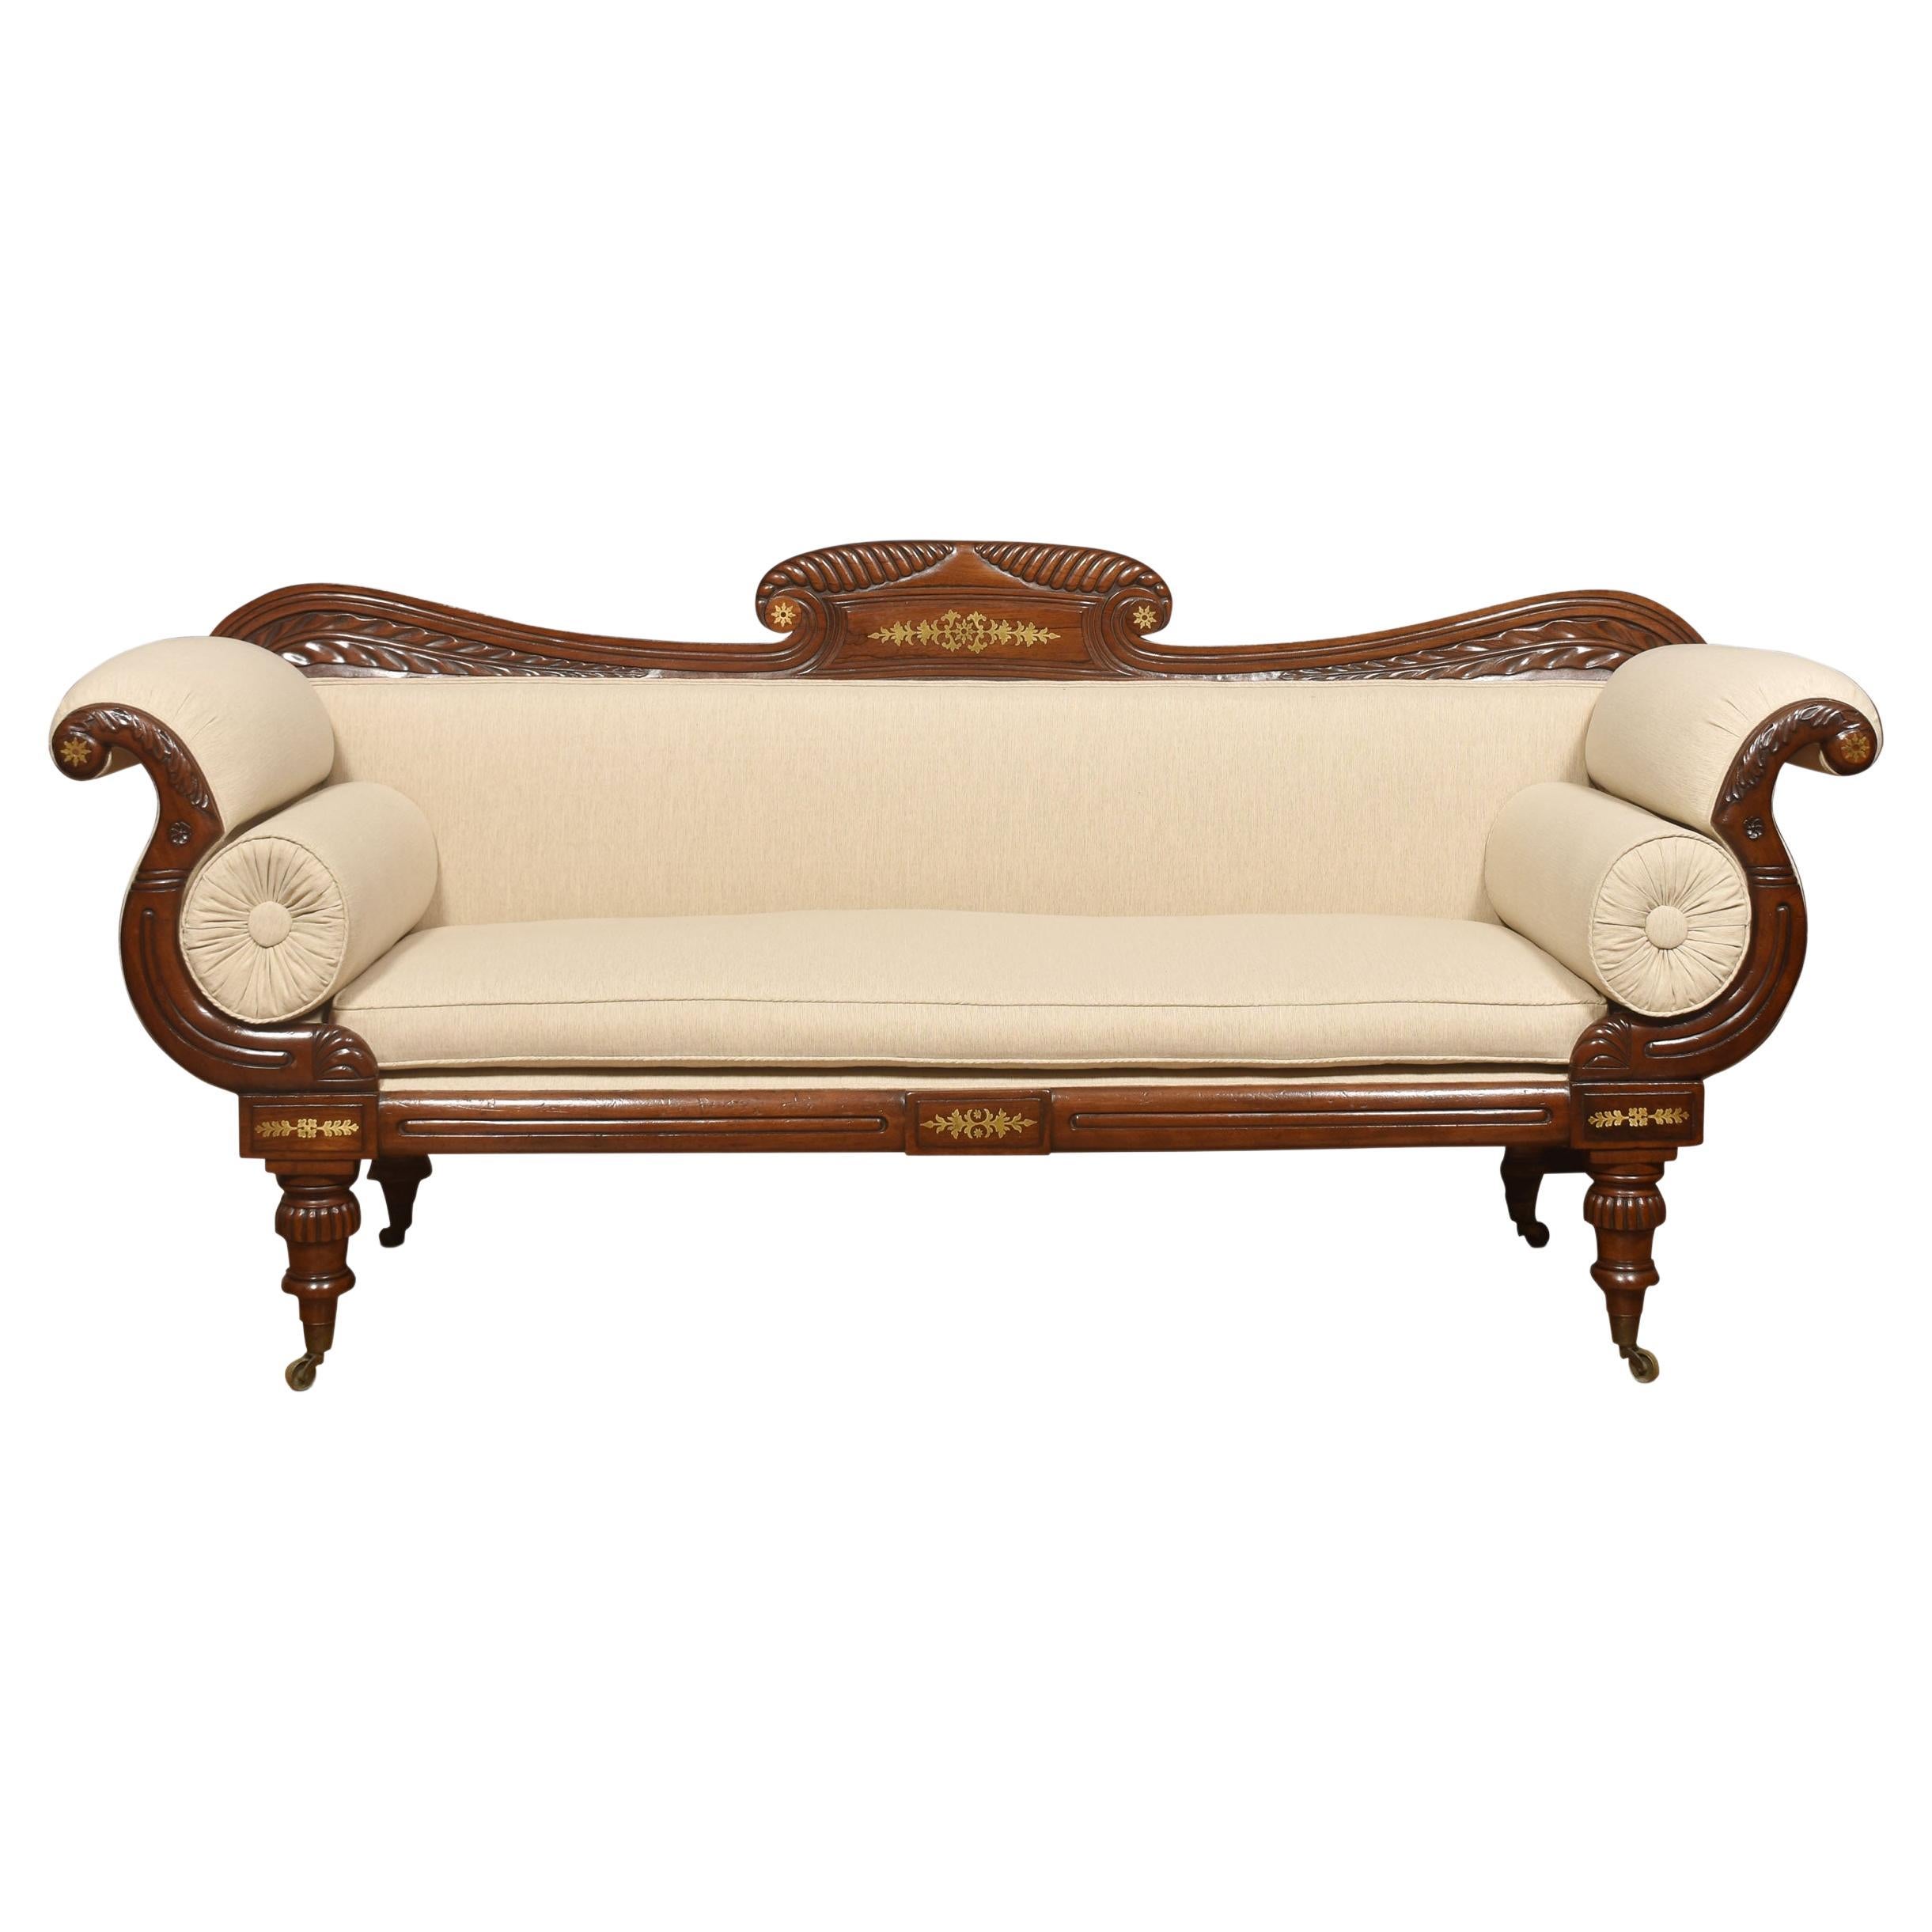 Regency Mahogany Brass Inlaid Scroll End Settee For Sale